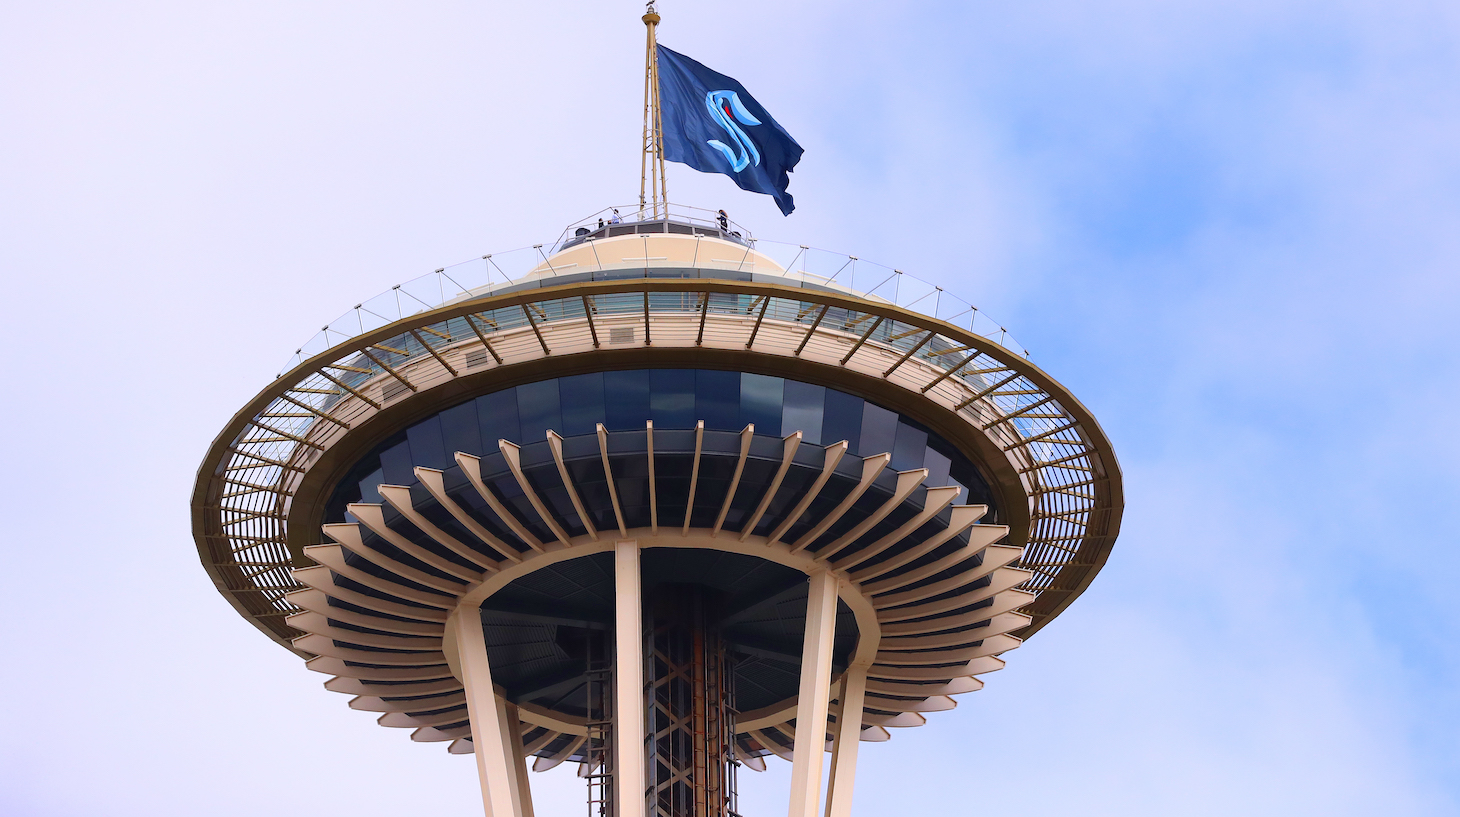 SEATTLE, WASHINGTON - JULY 23: A general view of the Space Needle as the Seattle Kraken team flag is hung from above on July 23, 2020 in Seattle, Washington. The NHL revealed the franchise's new team name today. (Photo by Abbie Parr/Getty Images)